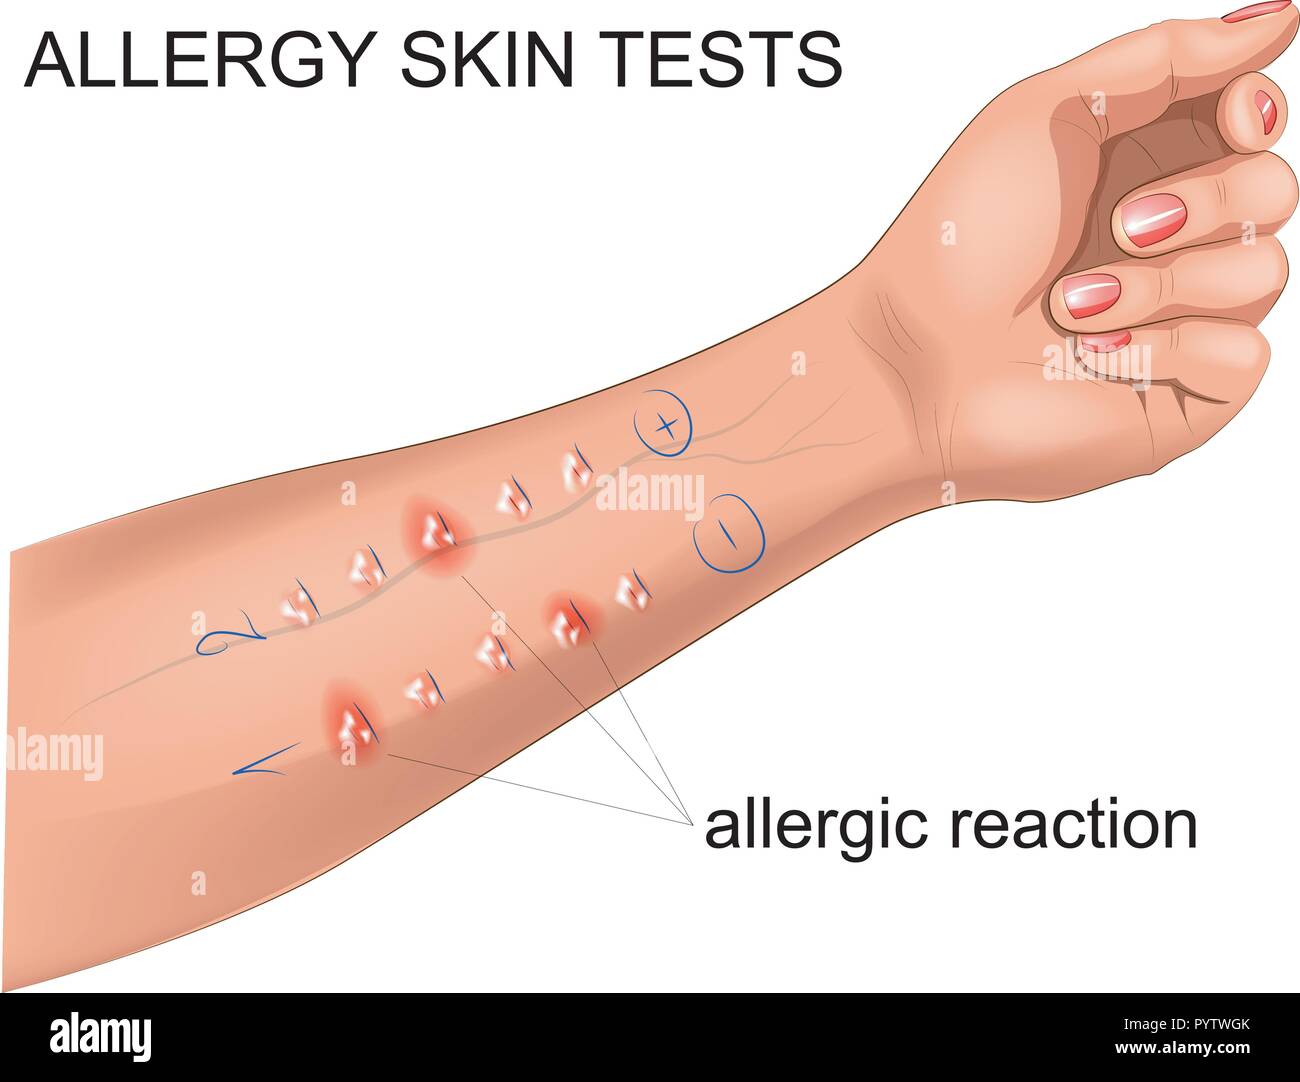 vector illustration of run scratch tests for allergies Stock Vector